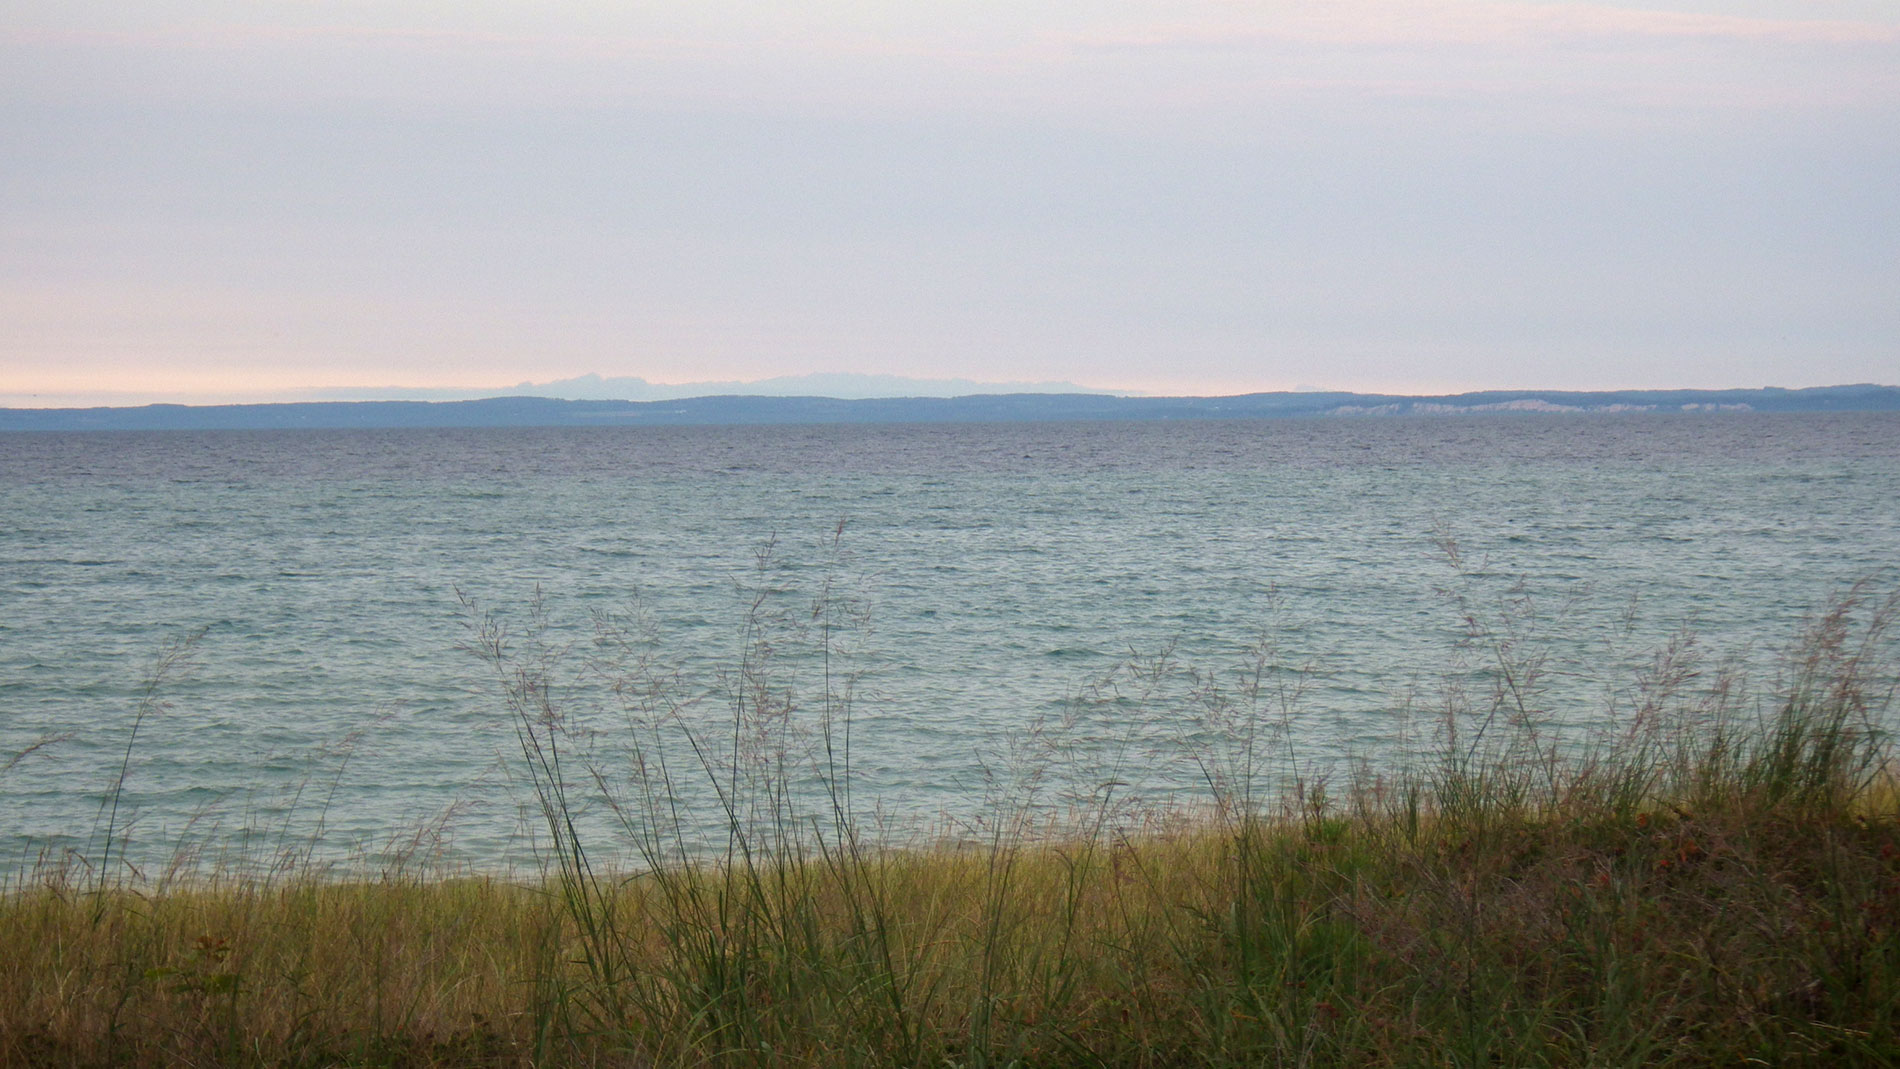 Across the Manitou Passage.